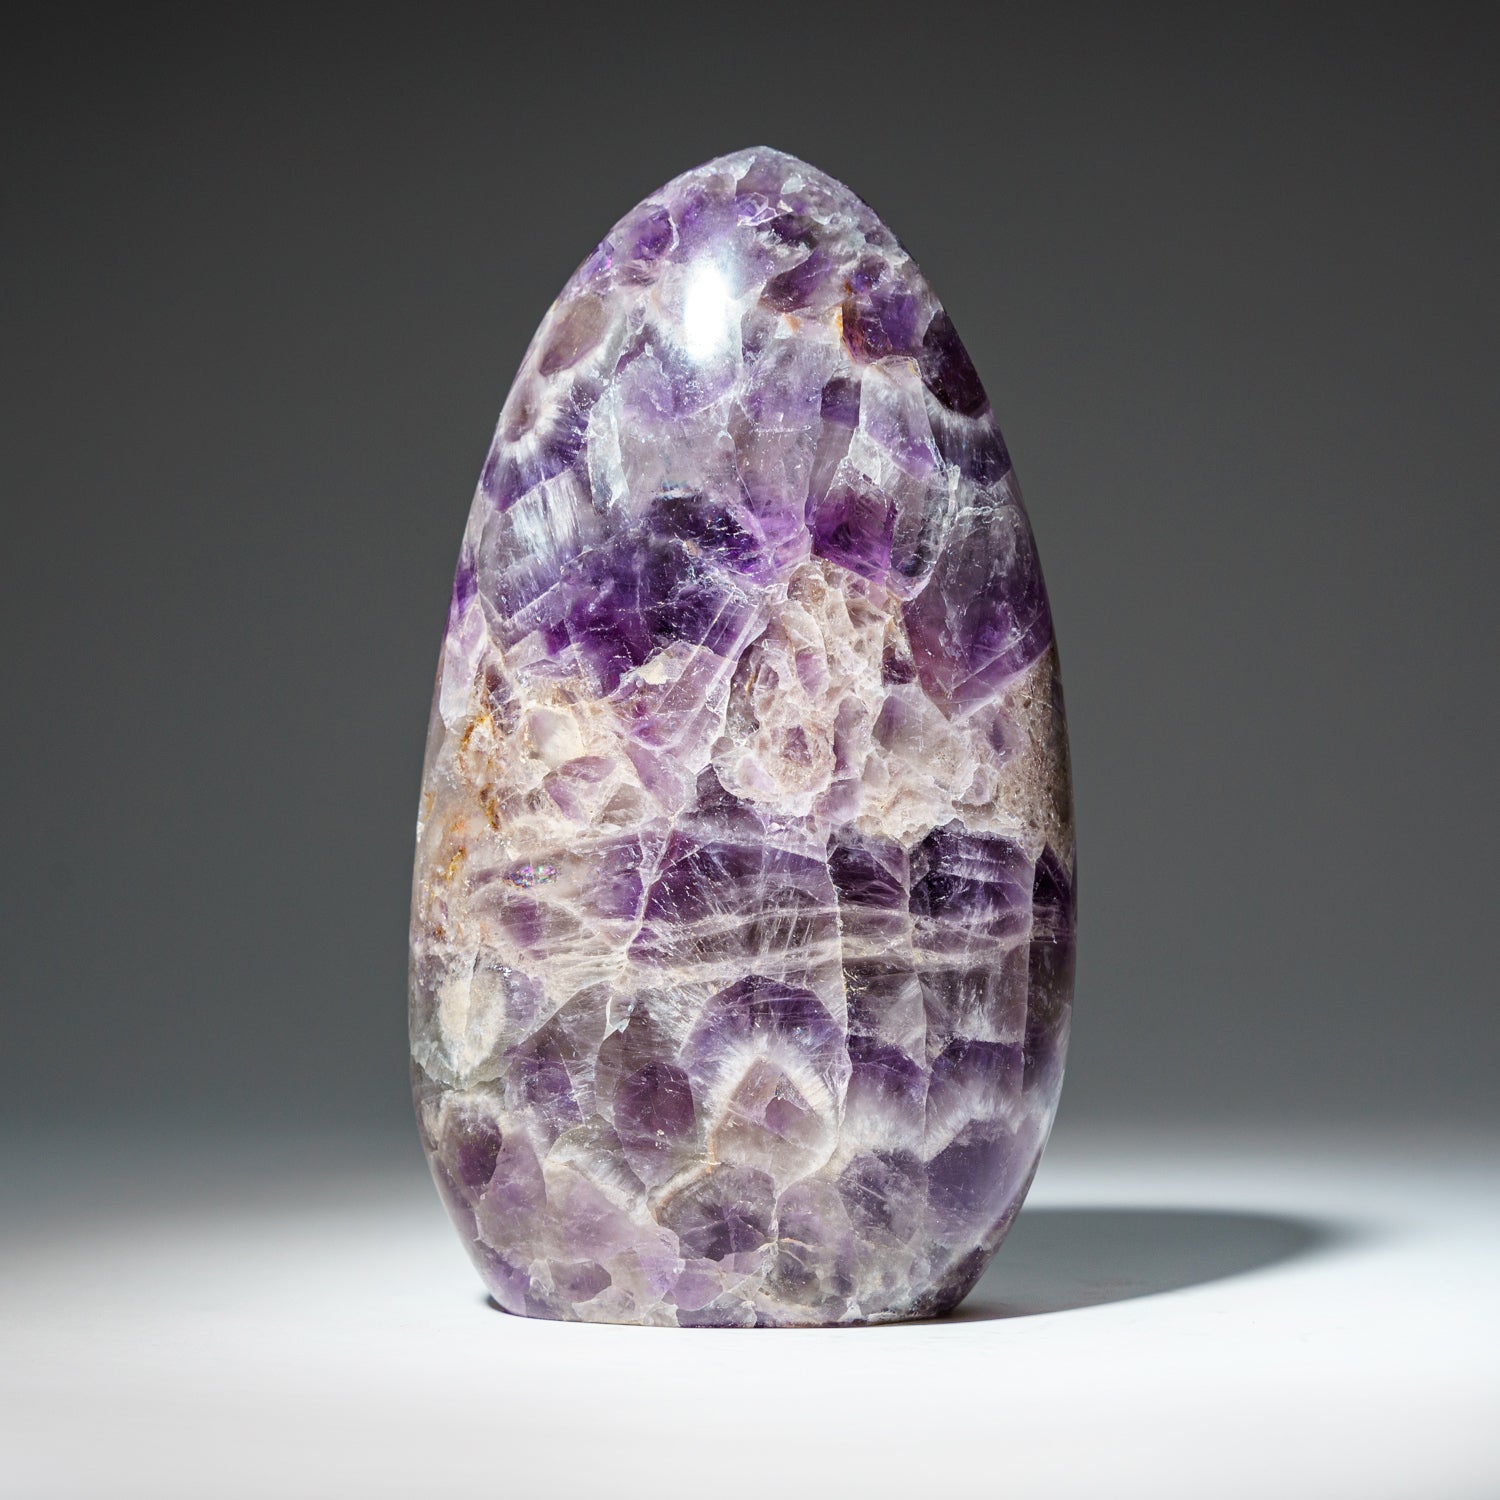 Polished Chevron Amethyst Freefrom from Brazil (5.2 lbs)